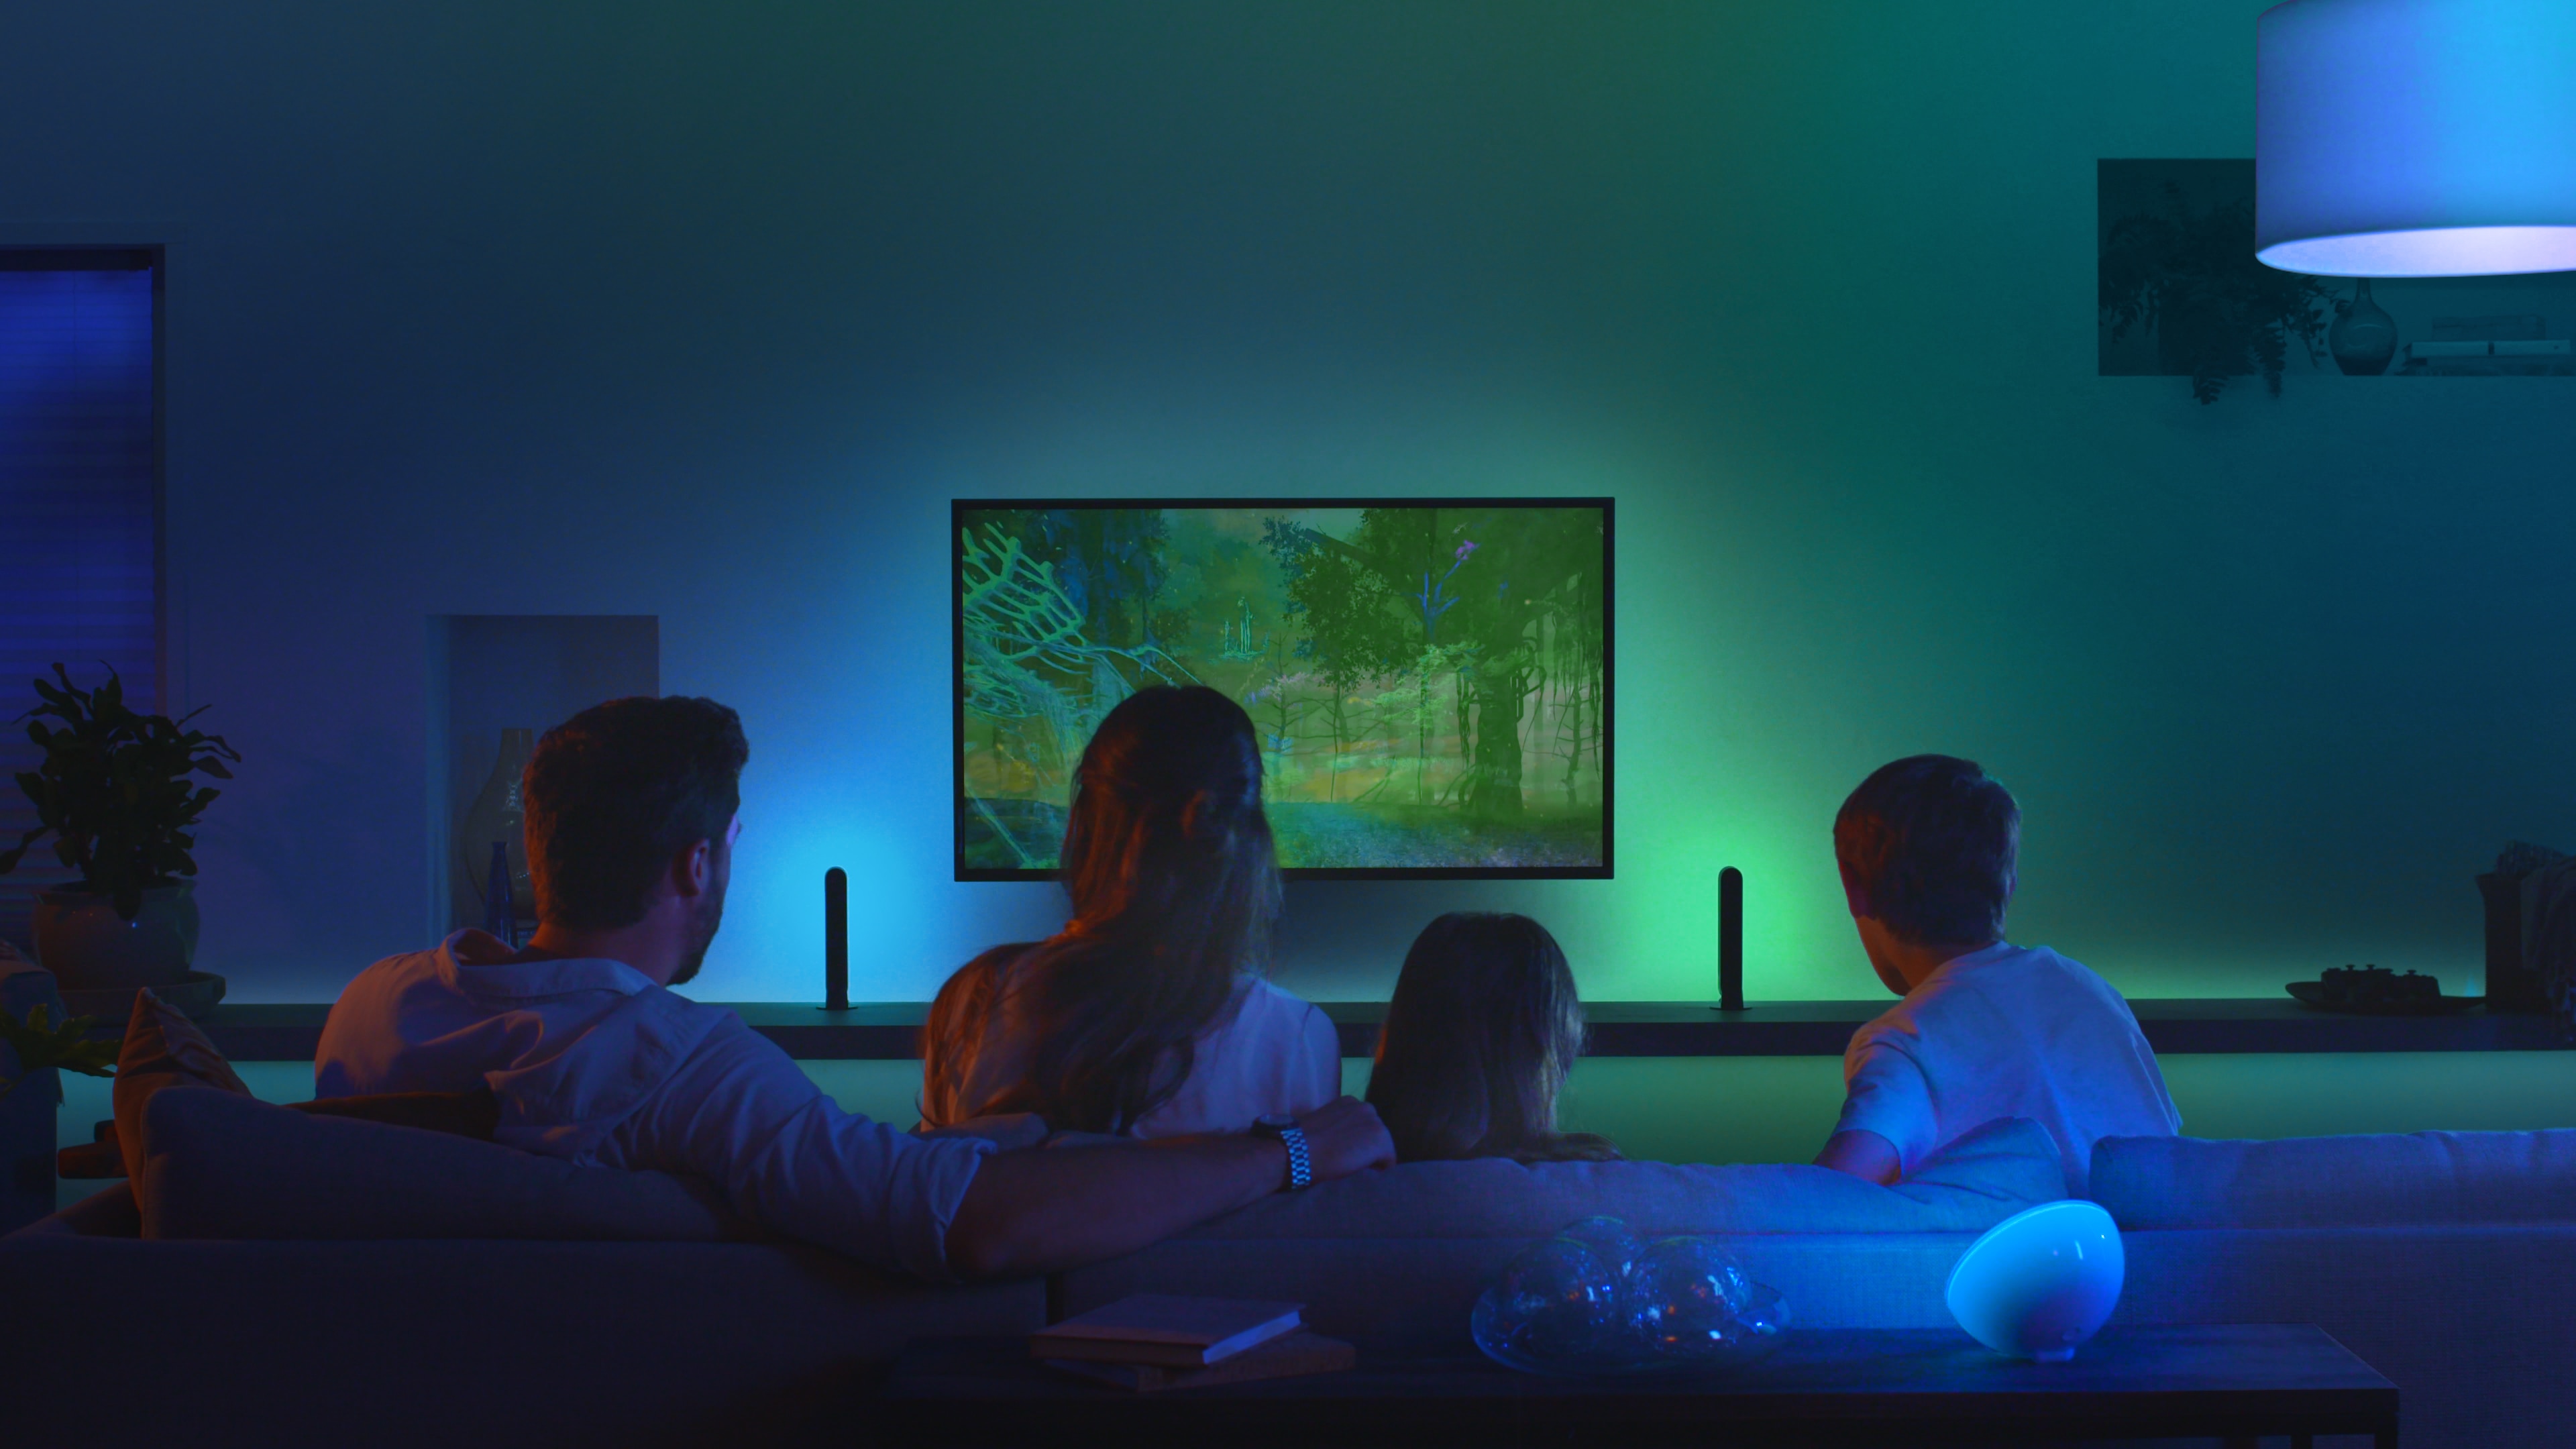 The Philips Hue Play HDMI Sync Box makes any home theater a bit more  theatrical